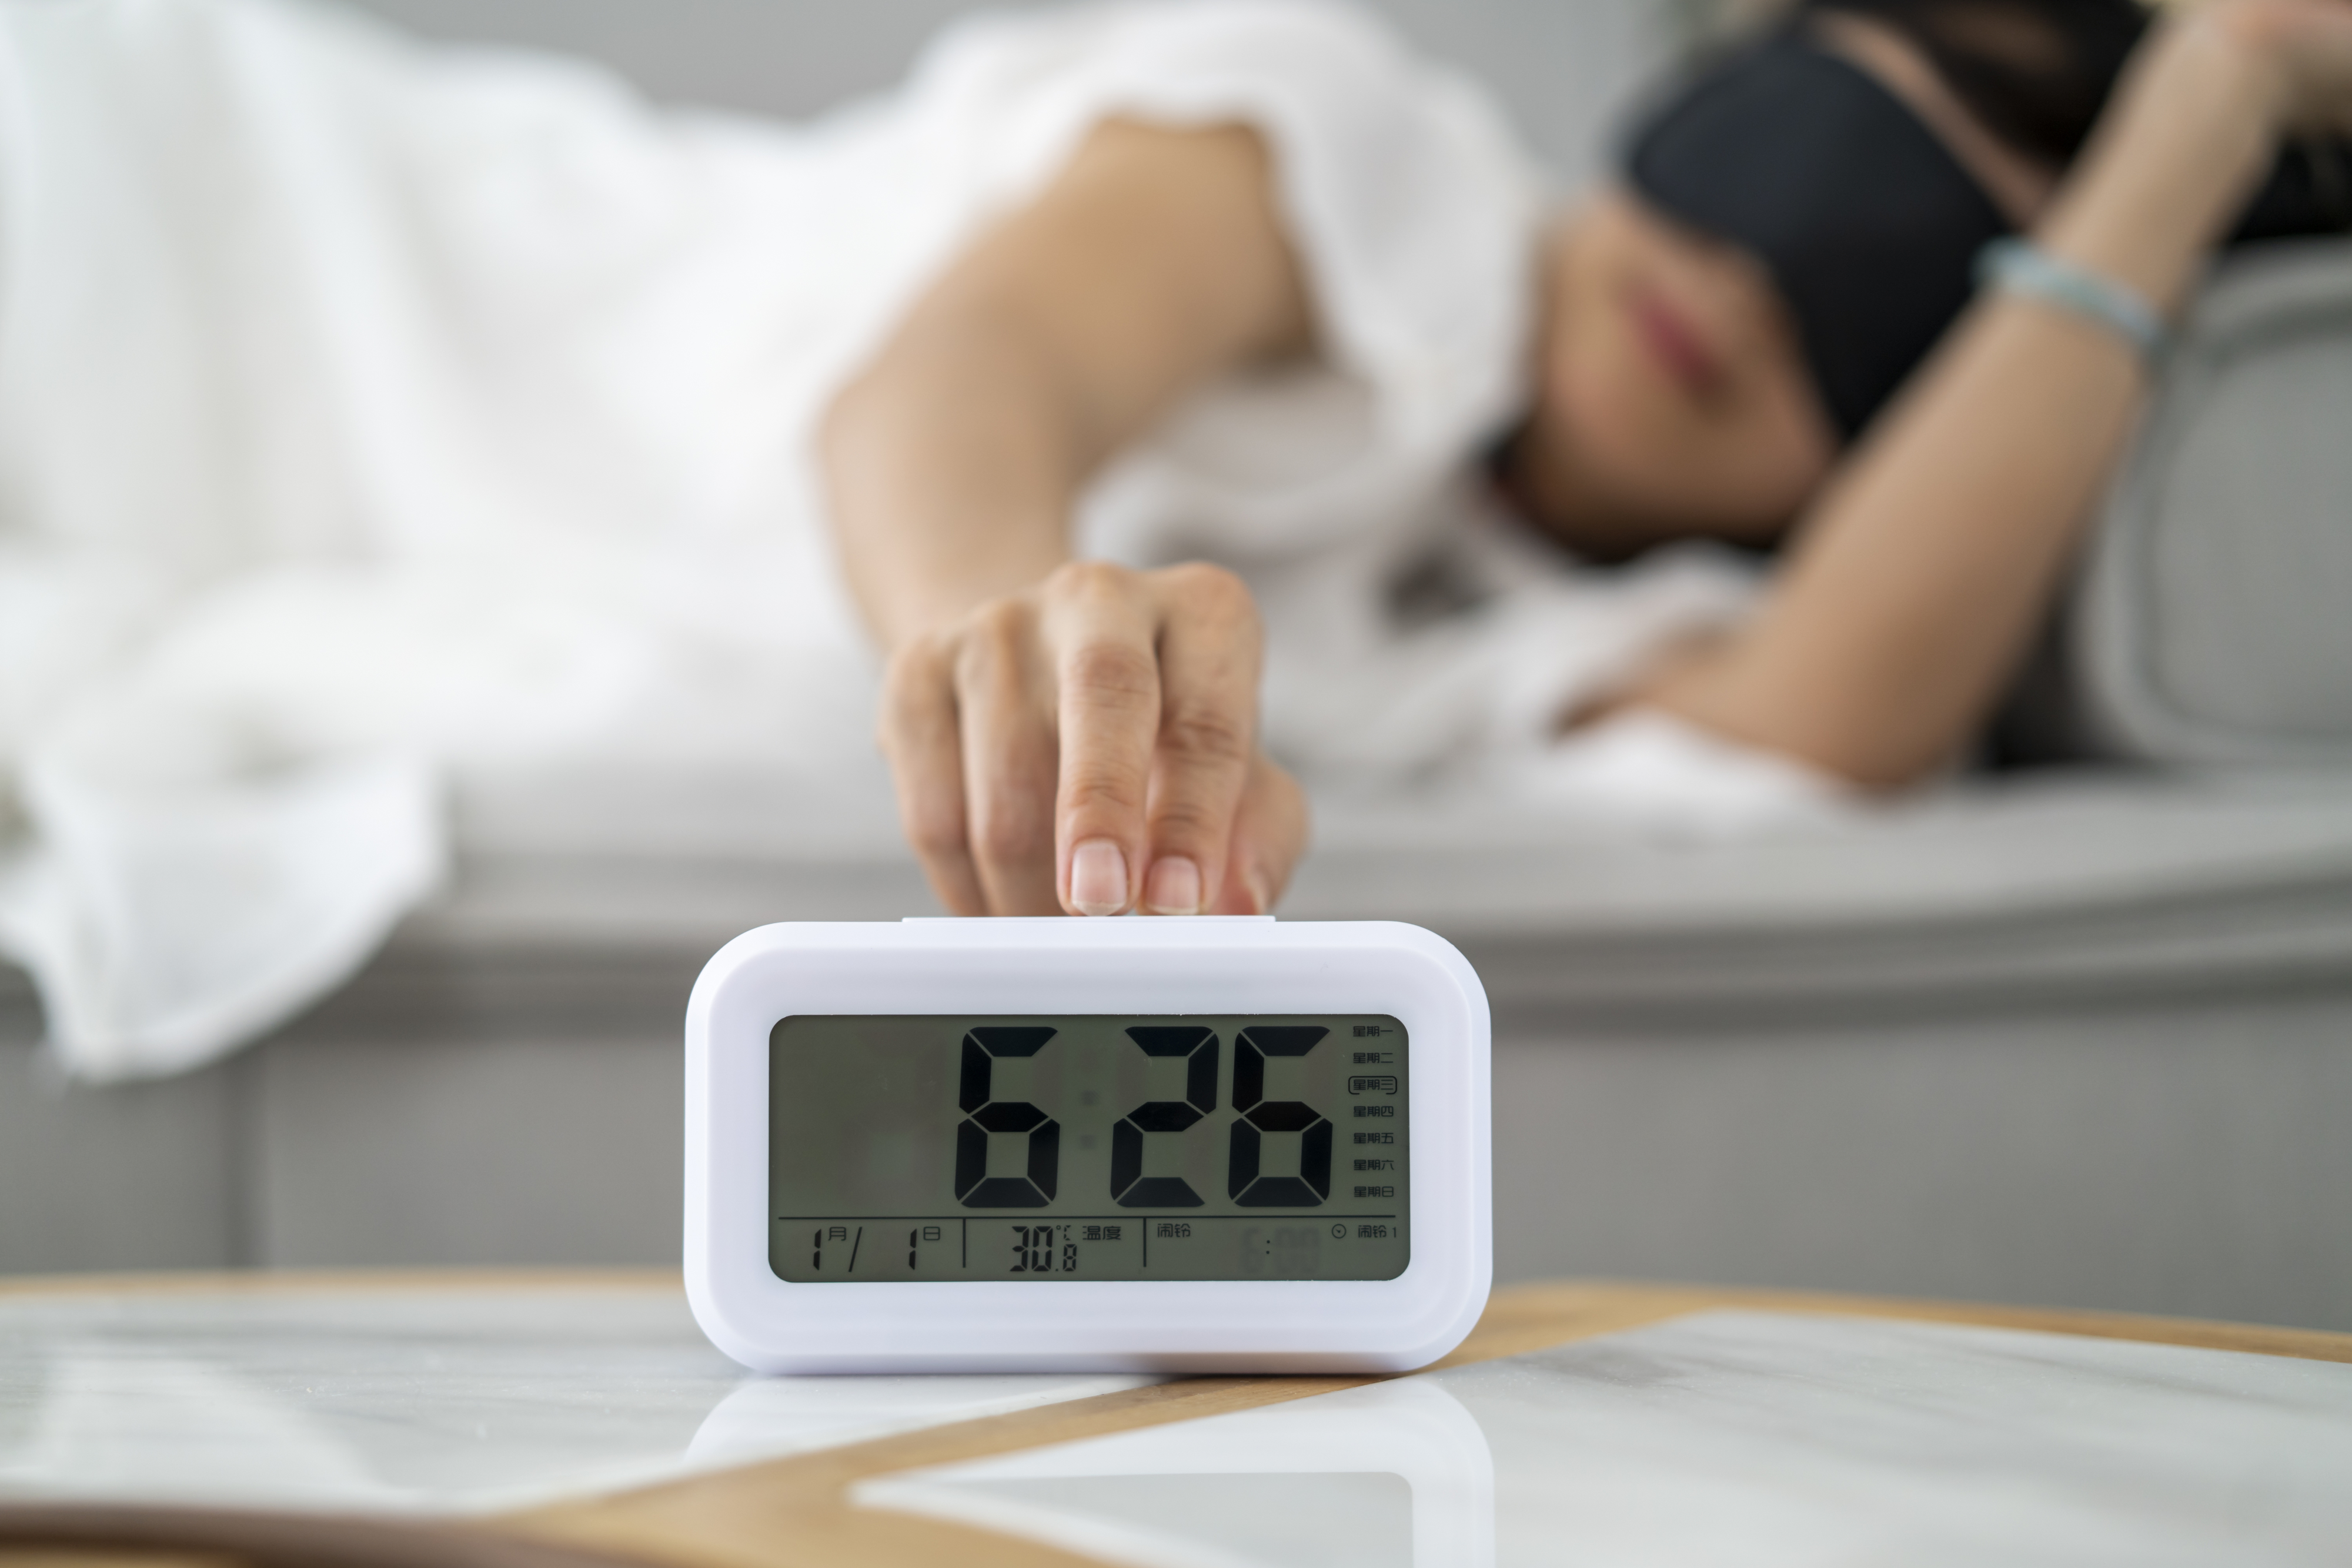 Person in bed reaching out to silence digital alarm clock reading 6:28